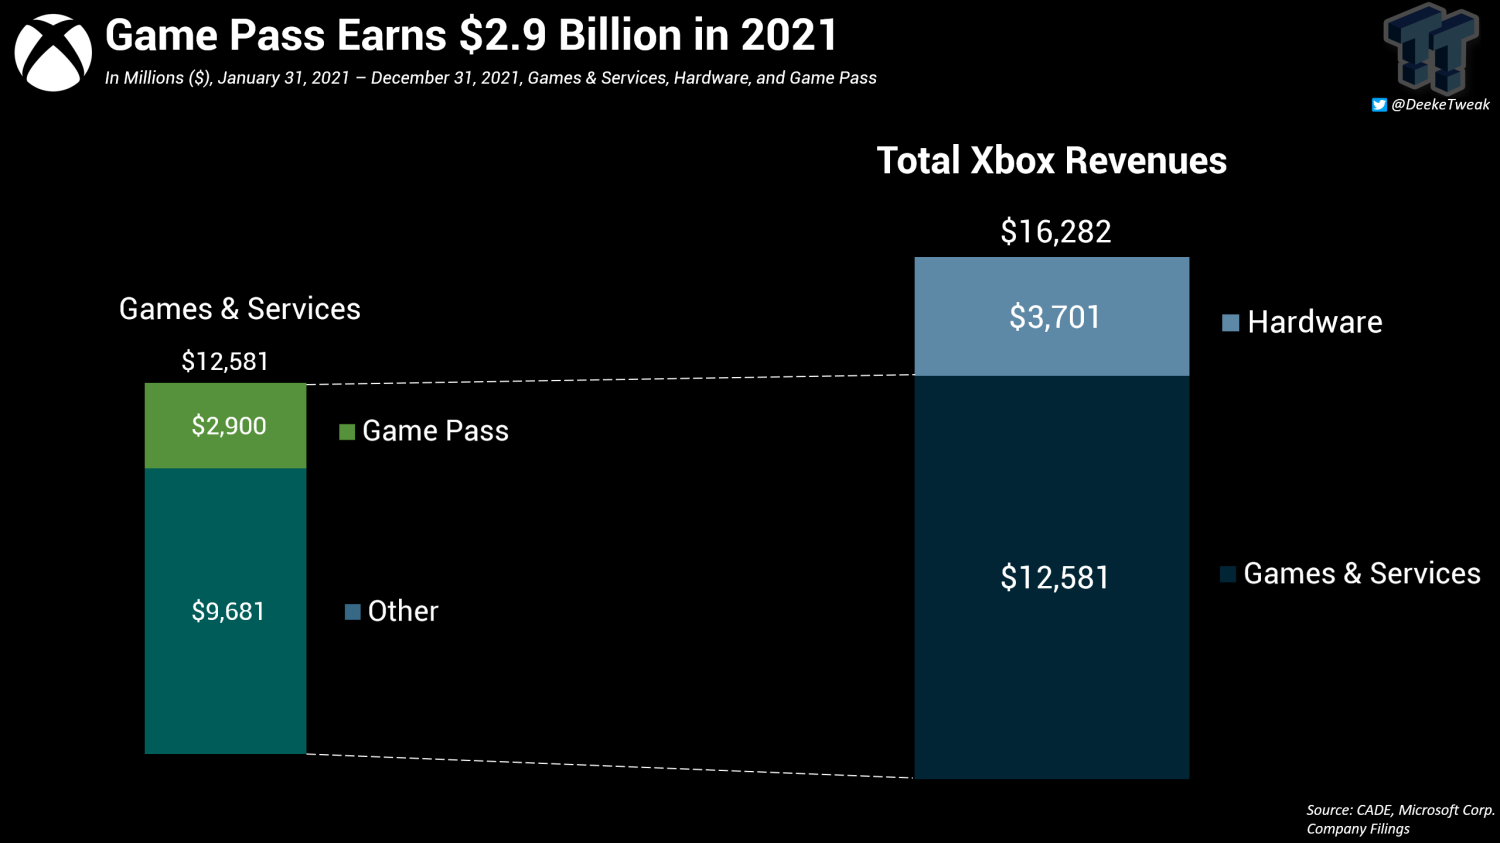 88846_32_game-pass-made-2-9-billion-in-2021-or-18-of-total-xbox-revenues_full.png